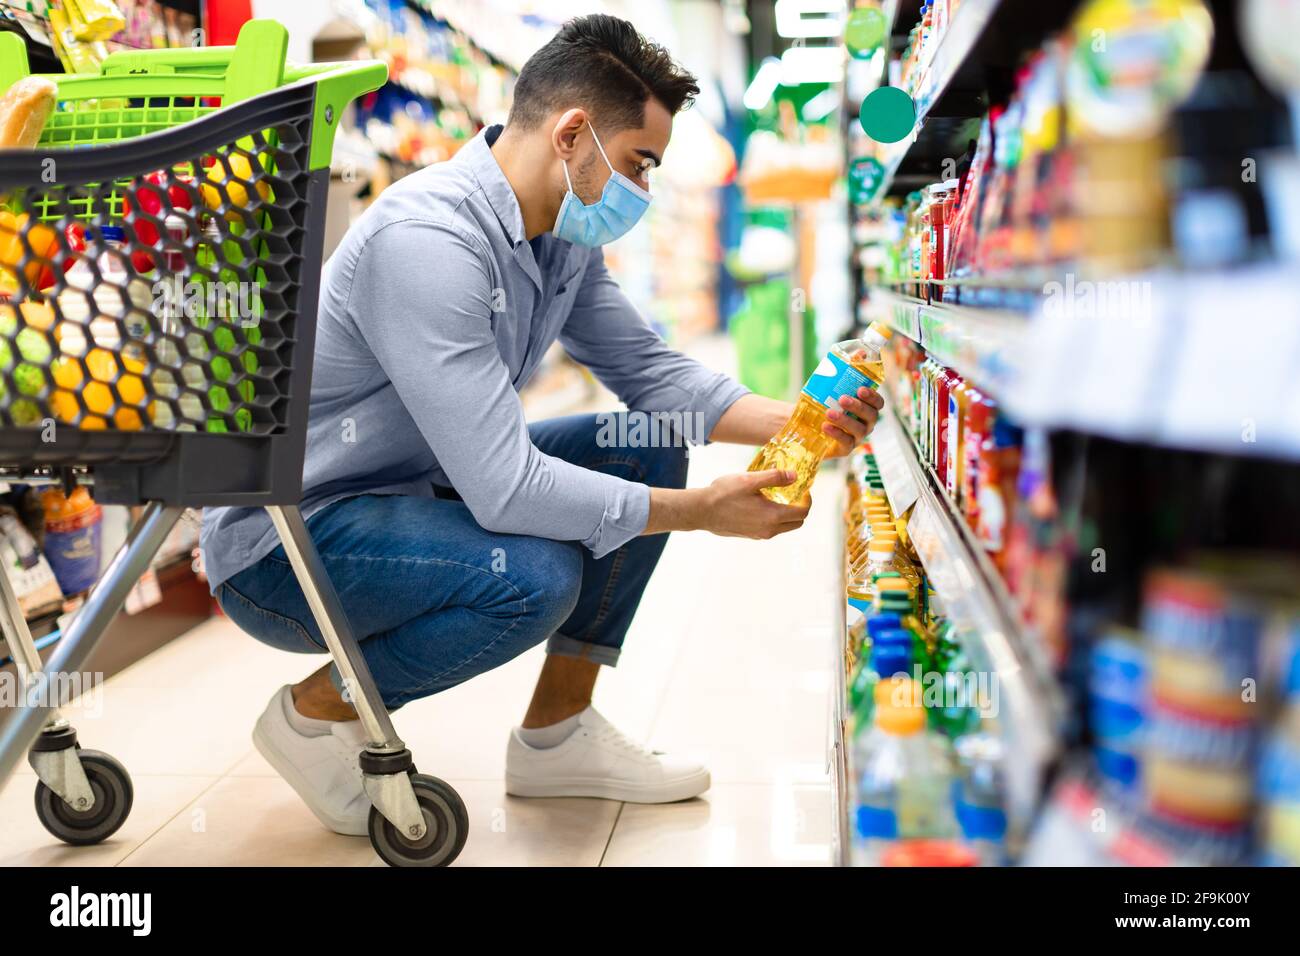 Middle-Eastern Man Doing Grocery Shopping Choosing Cooking Oil In Supermarket Stock Photo